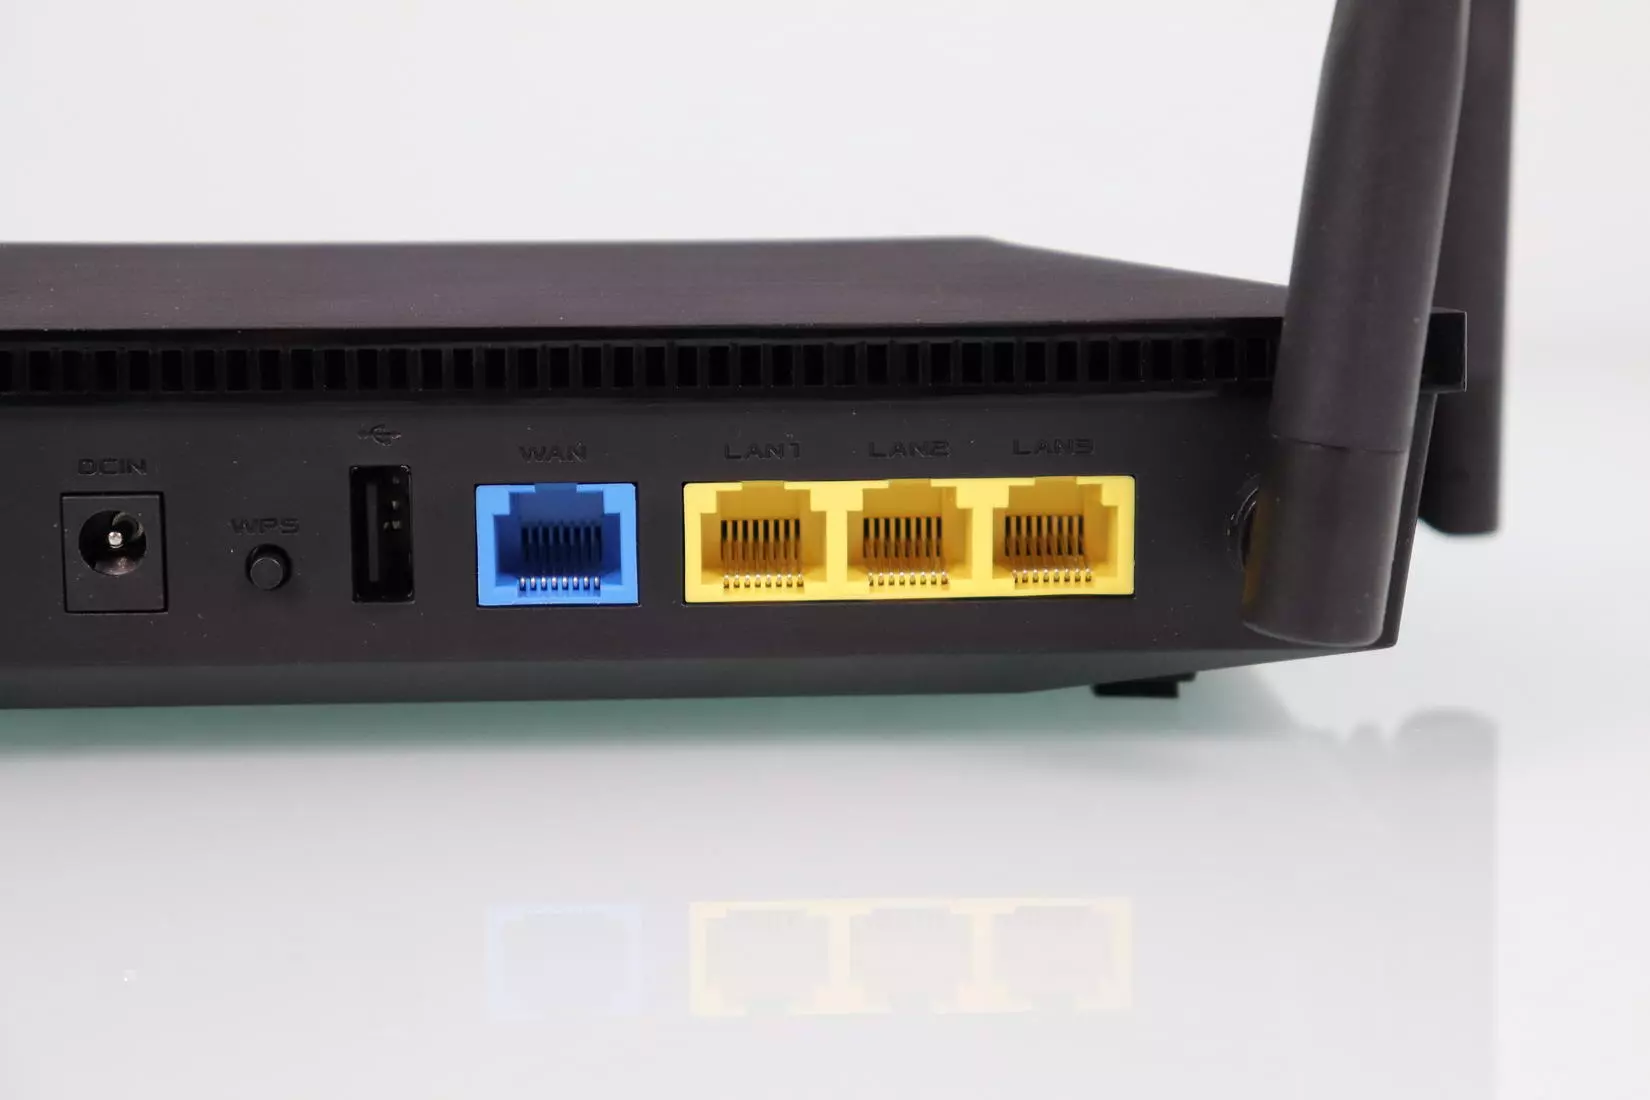 Gigabit Ethernet ports for WAN and LAN of the ASUS RT-AX53U